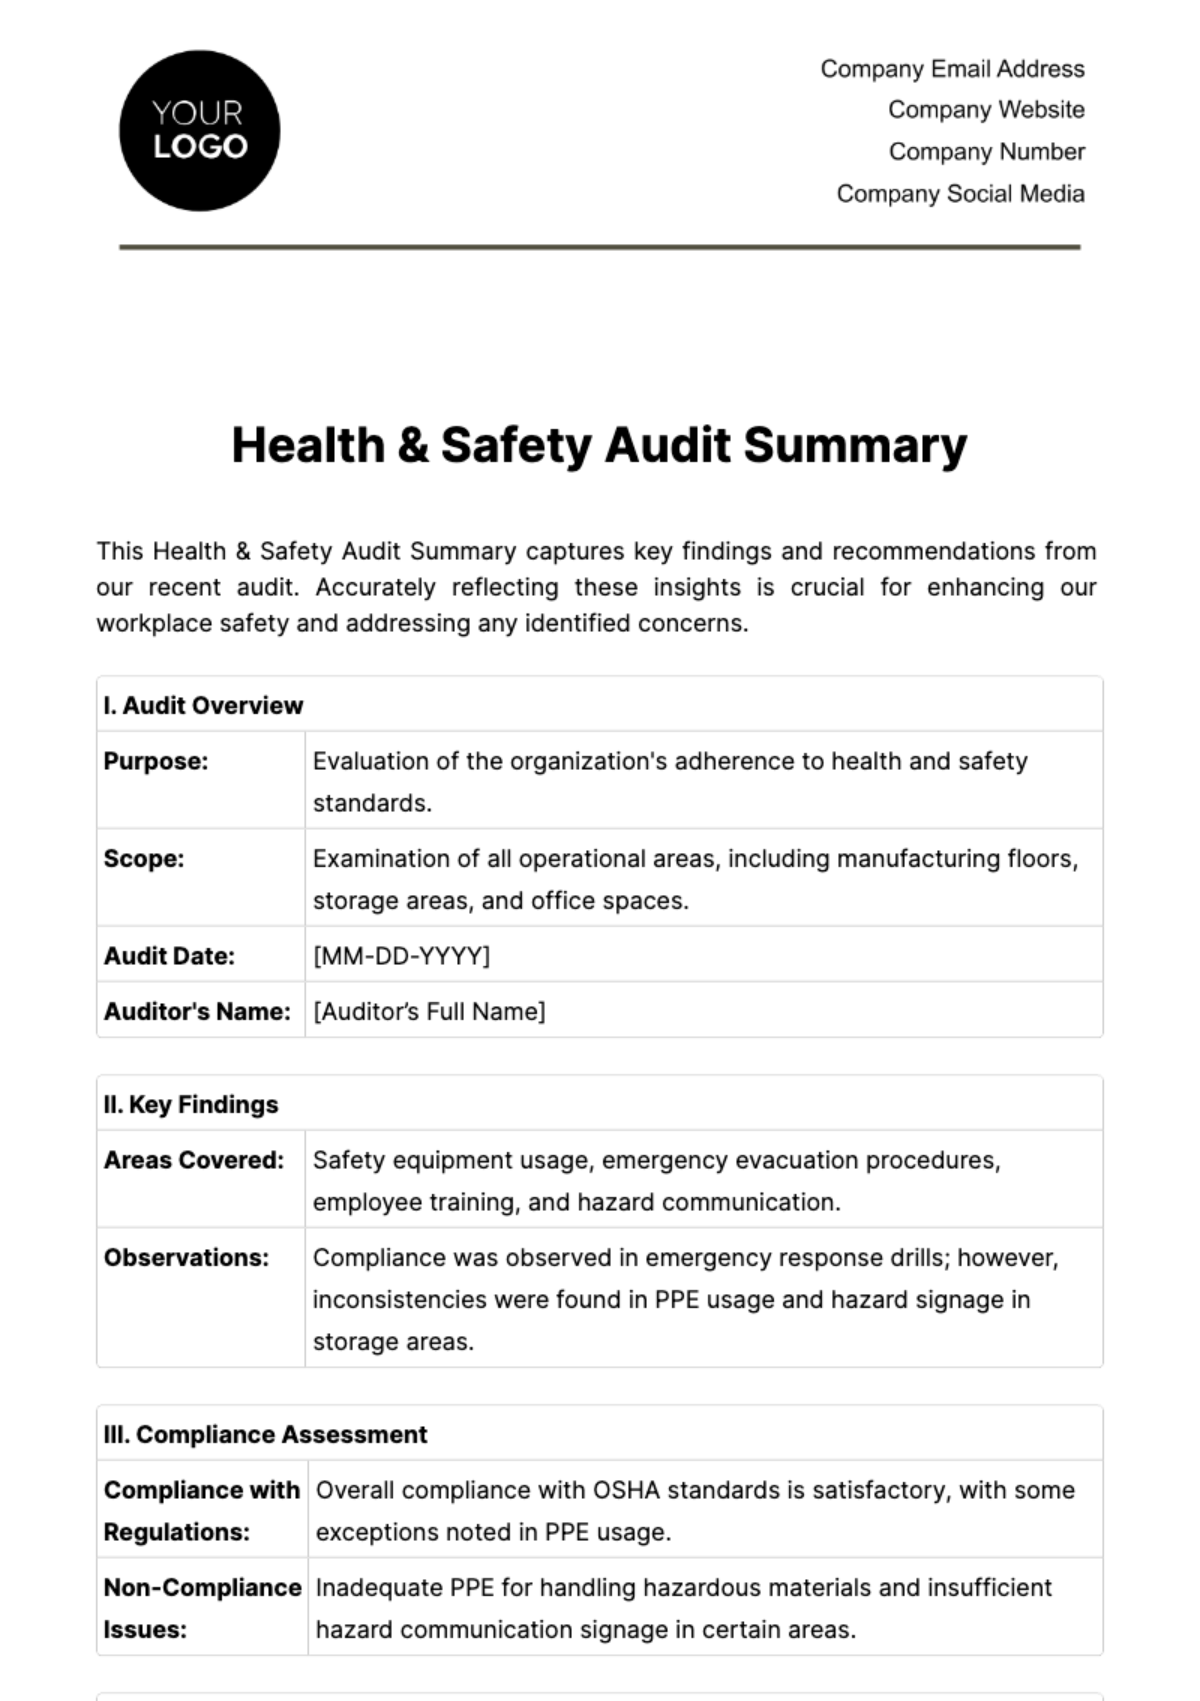 Health & Safety Audit Summary Template